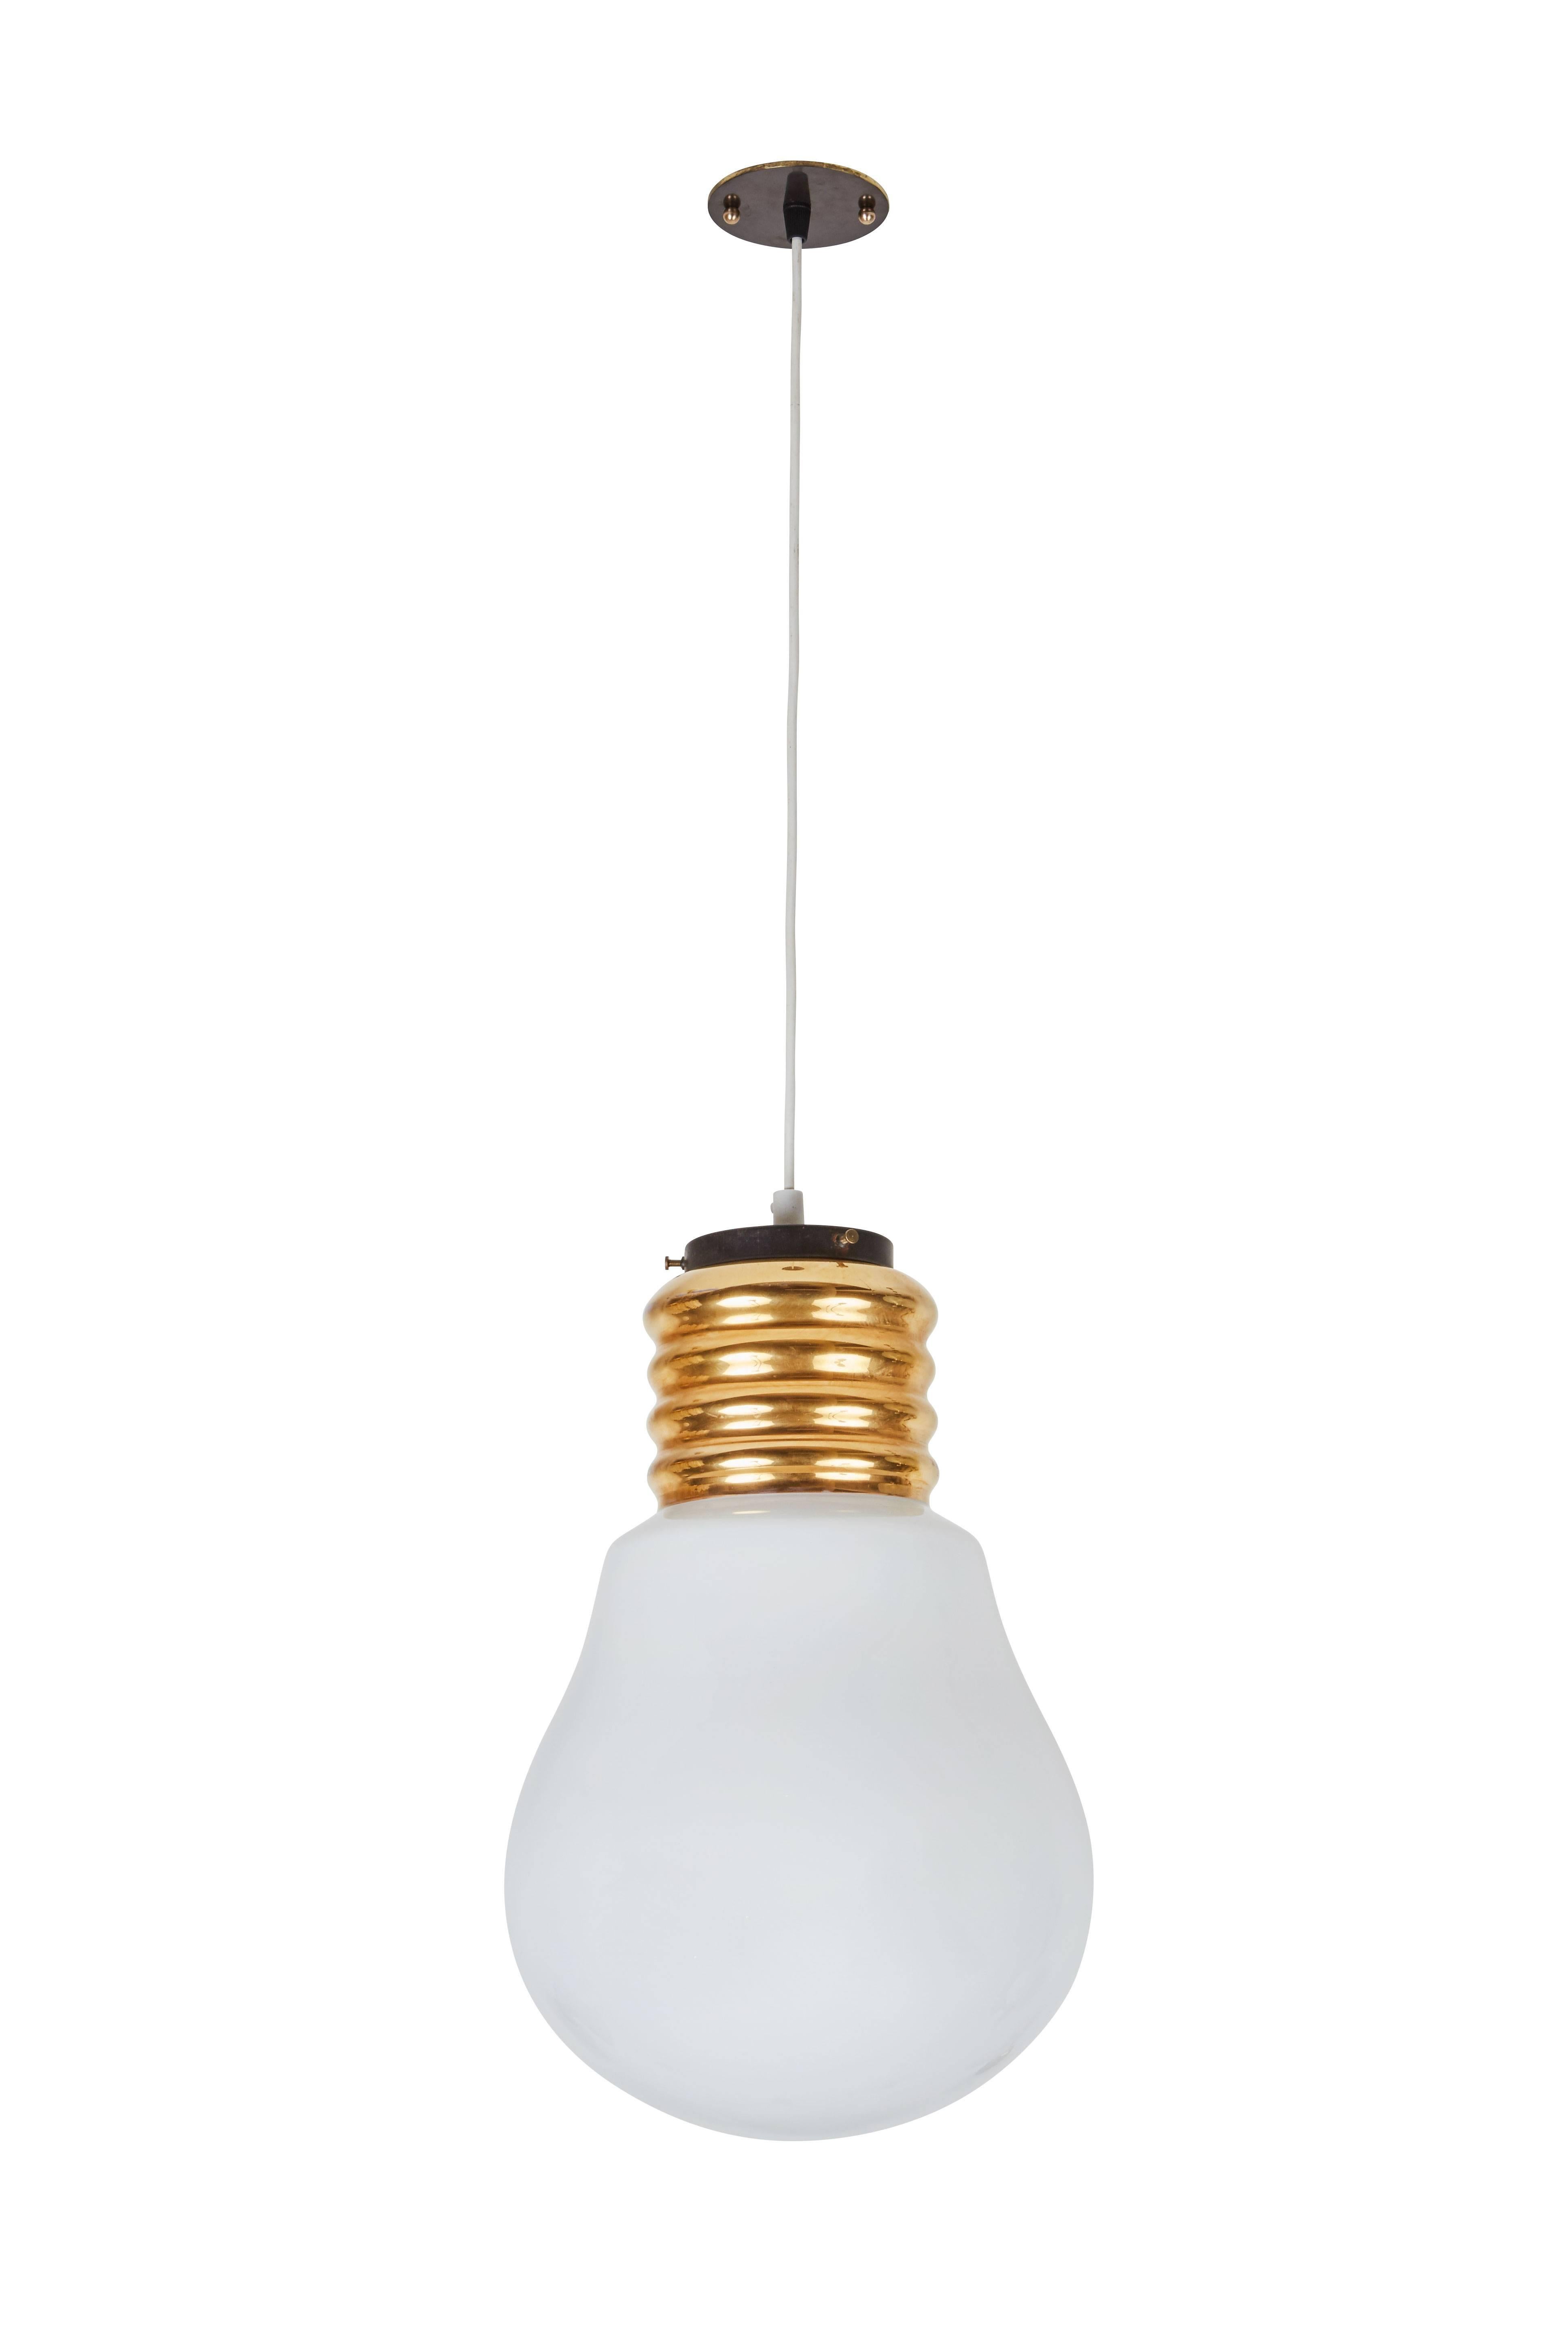 Bulb-shaped pendant with opal glass shade and painted glass shade holder. Designed in 1966 by Ingo Maurer. Manufactured for M Design. The overall drop can be adjusted. Wired for US junction boxes. Requires one E27 100w maximum bulb.